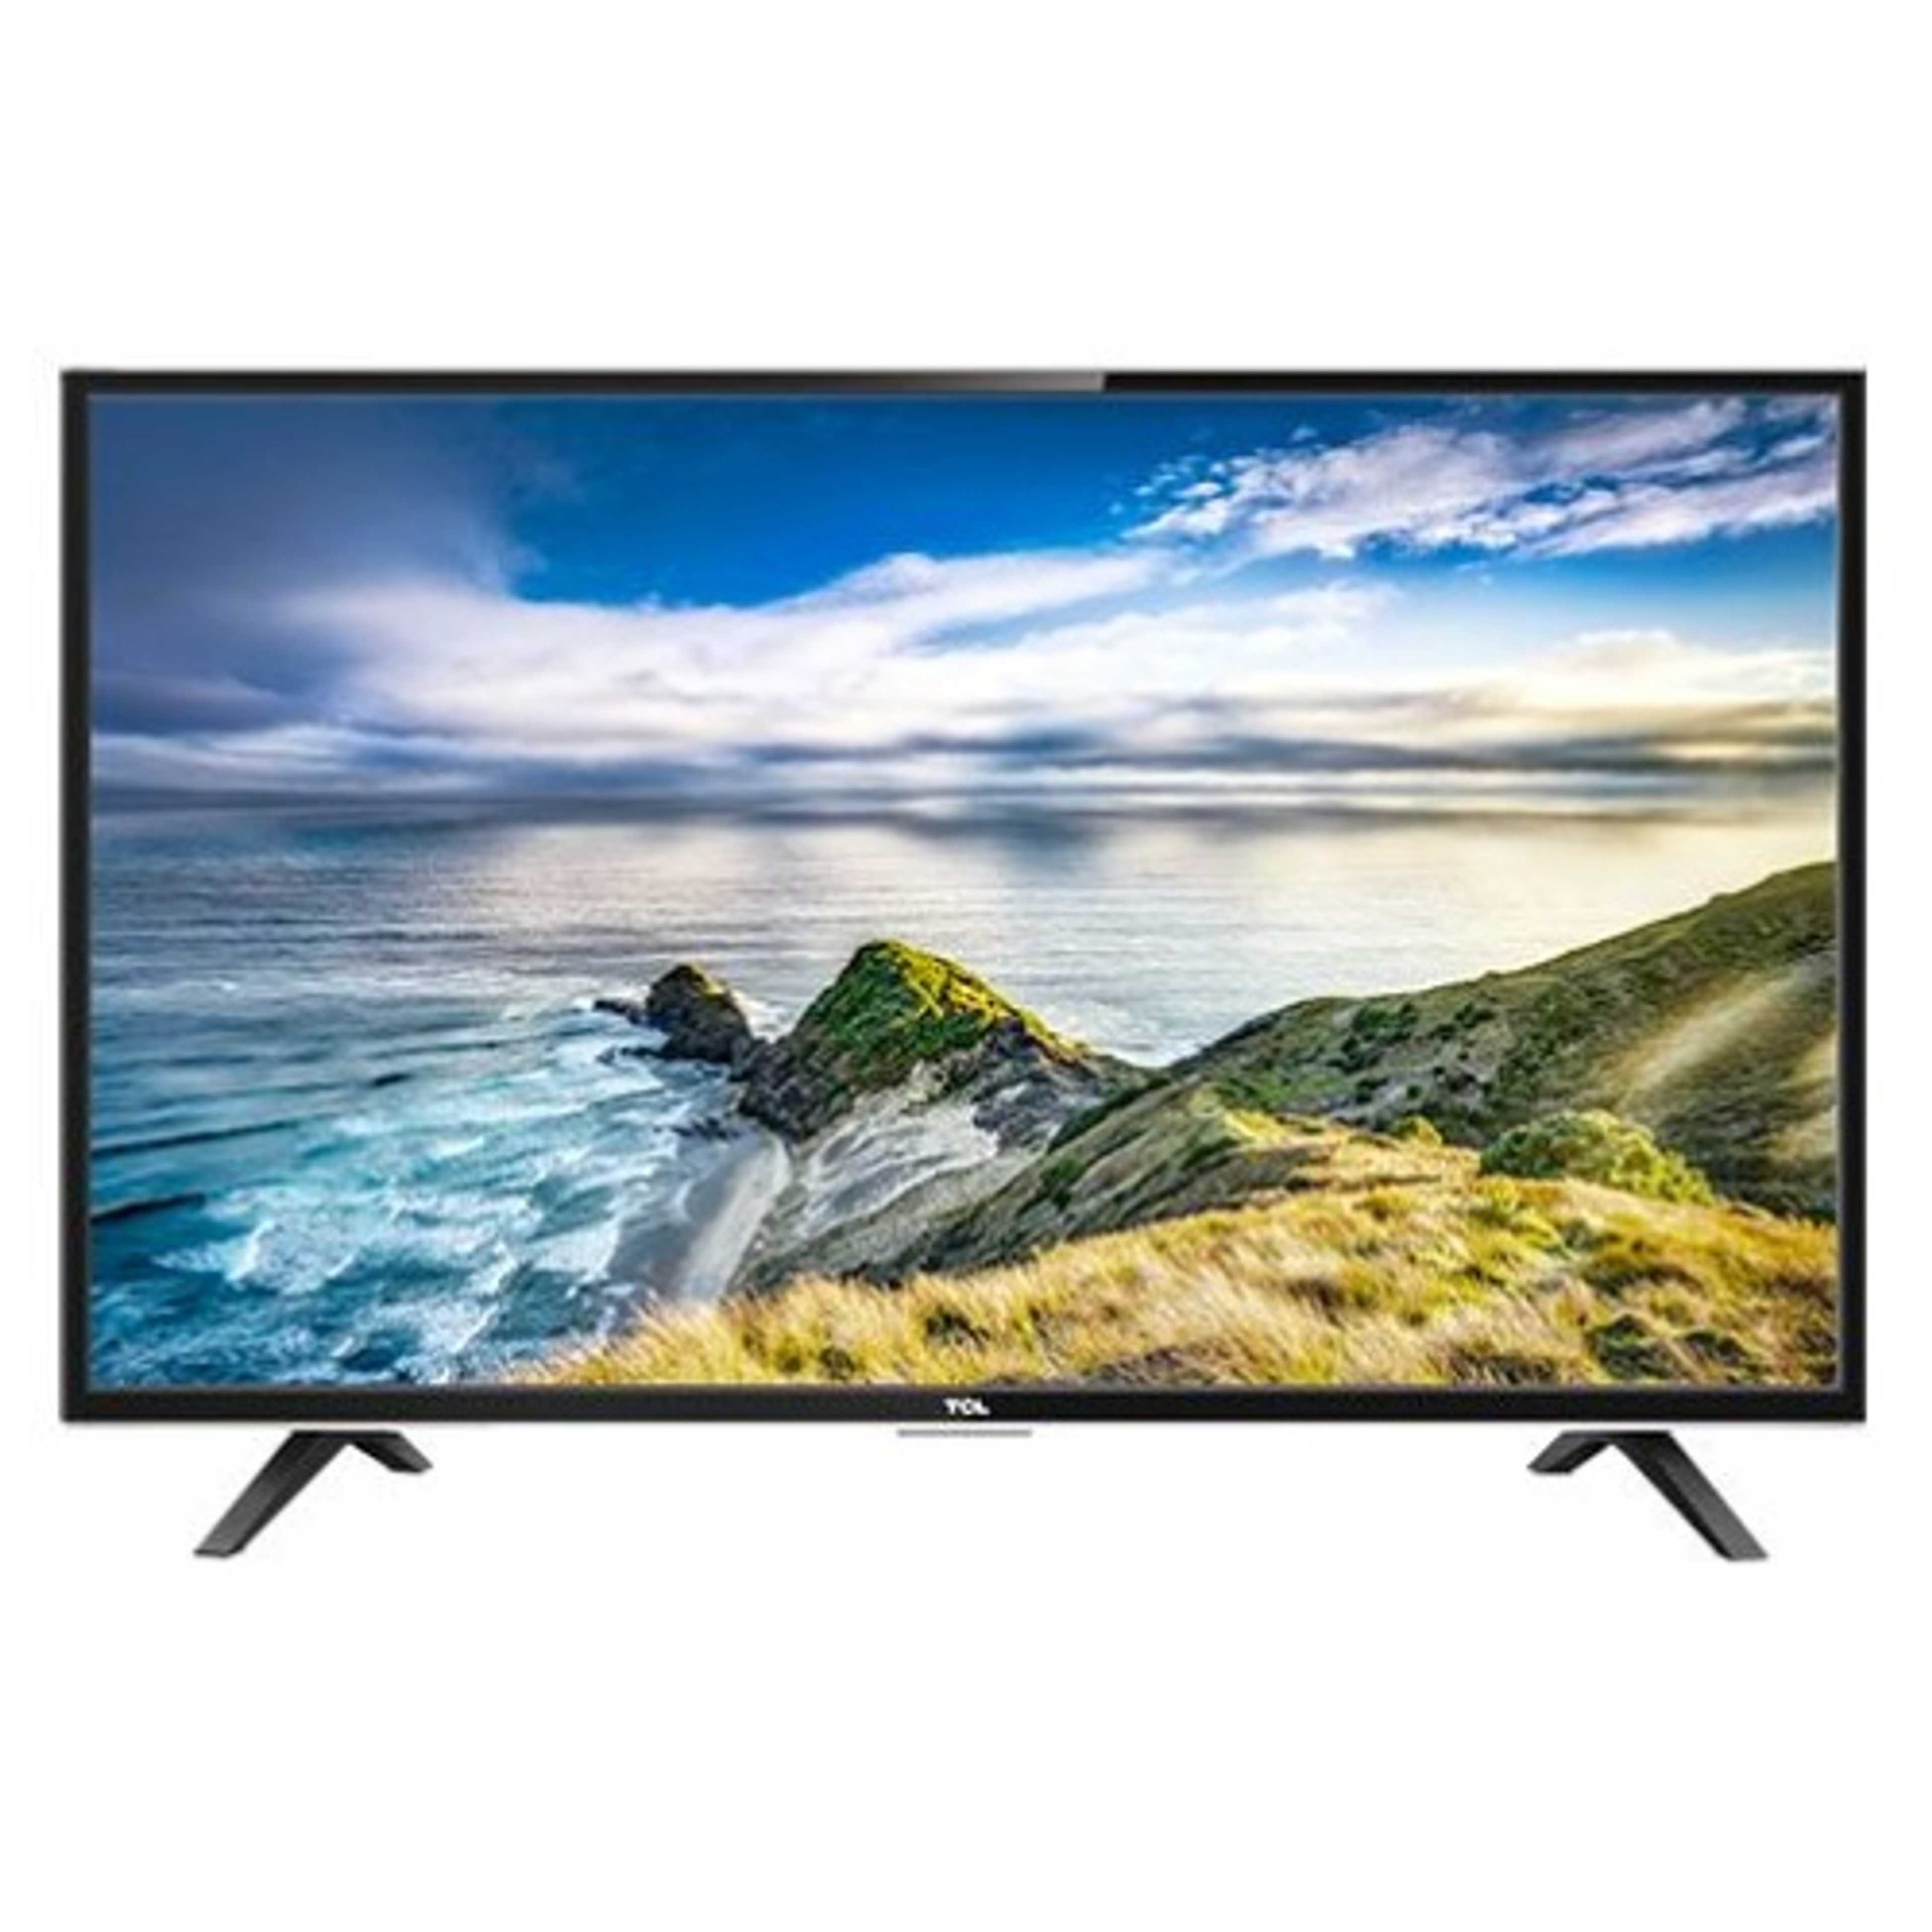 TCL 32 inches Simple Non Smart LED TV (32D310)